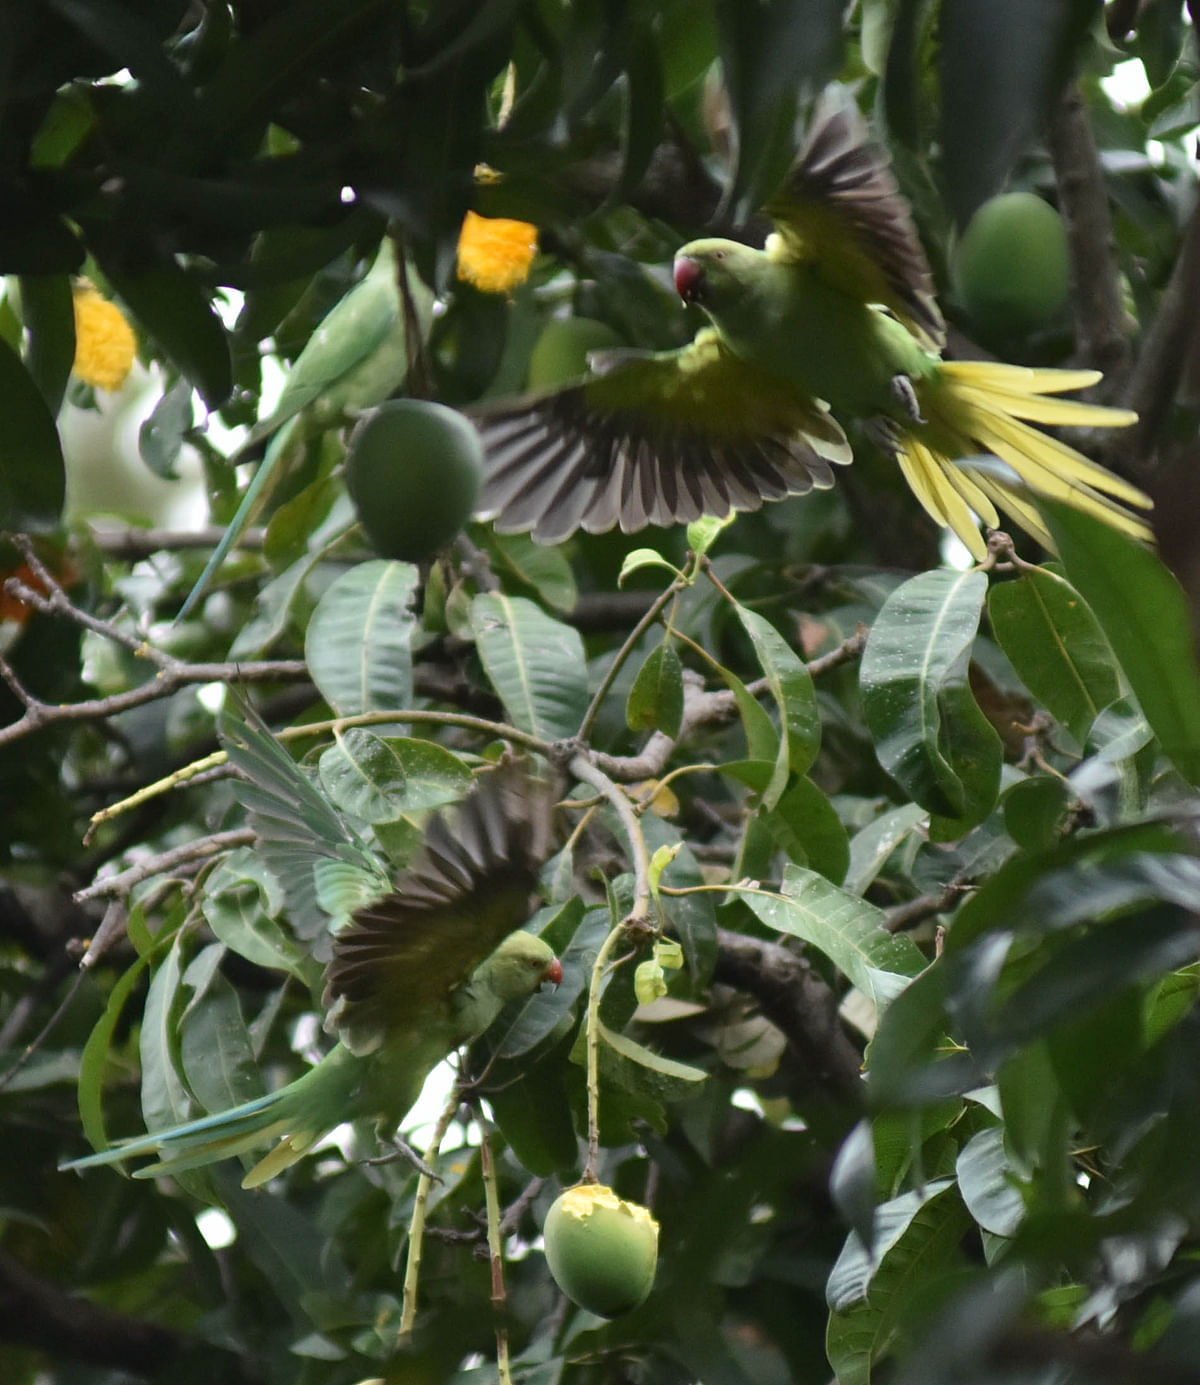 A group of parrots doing the hassle for eats mango in a tree at Sanjaynagar in Bengaluru on Tuesday 28th April 2020. Photo by Janardhan B K